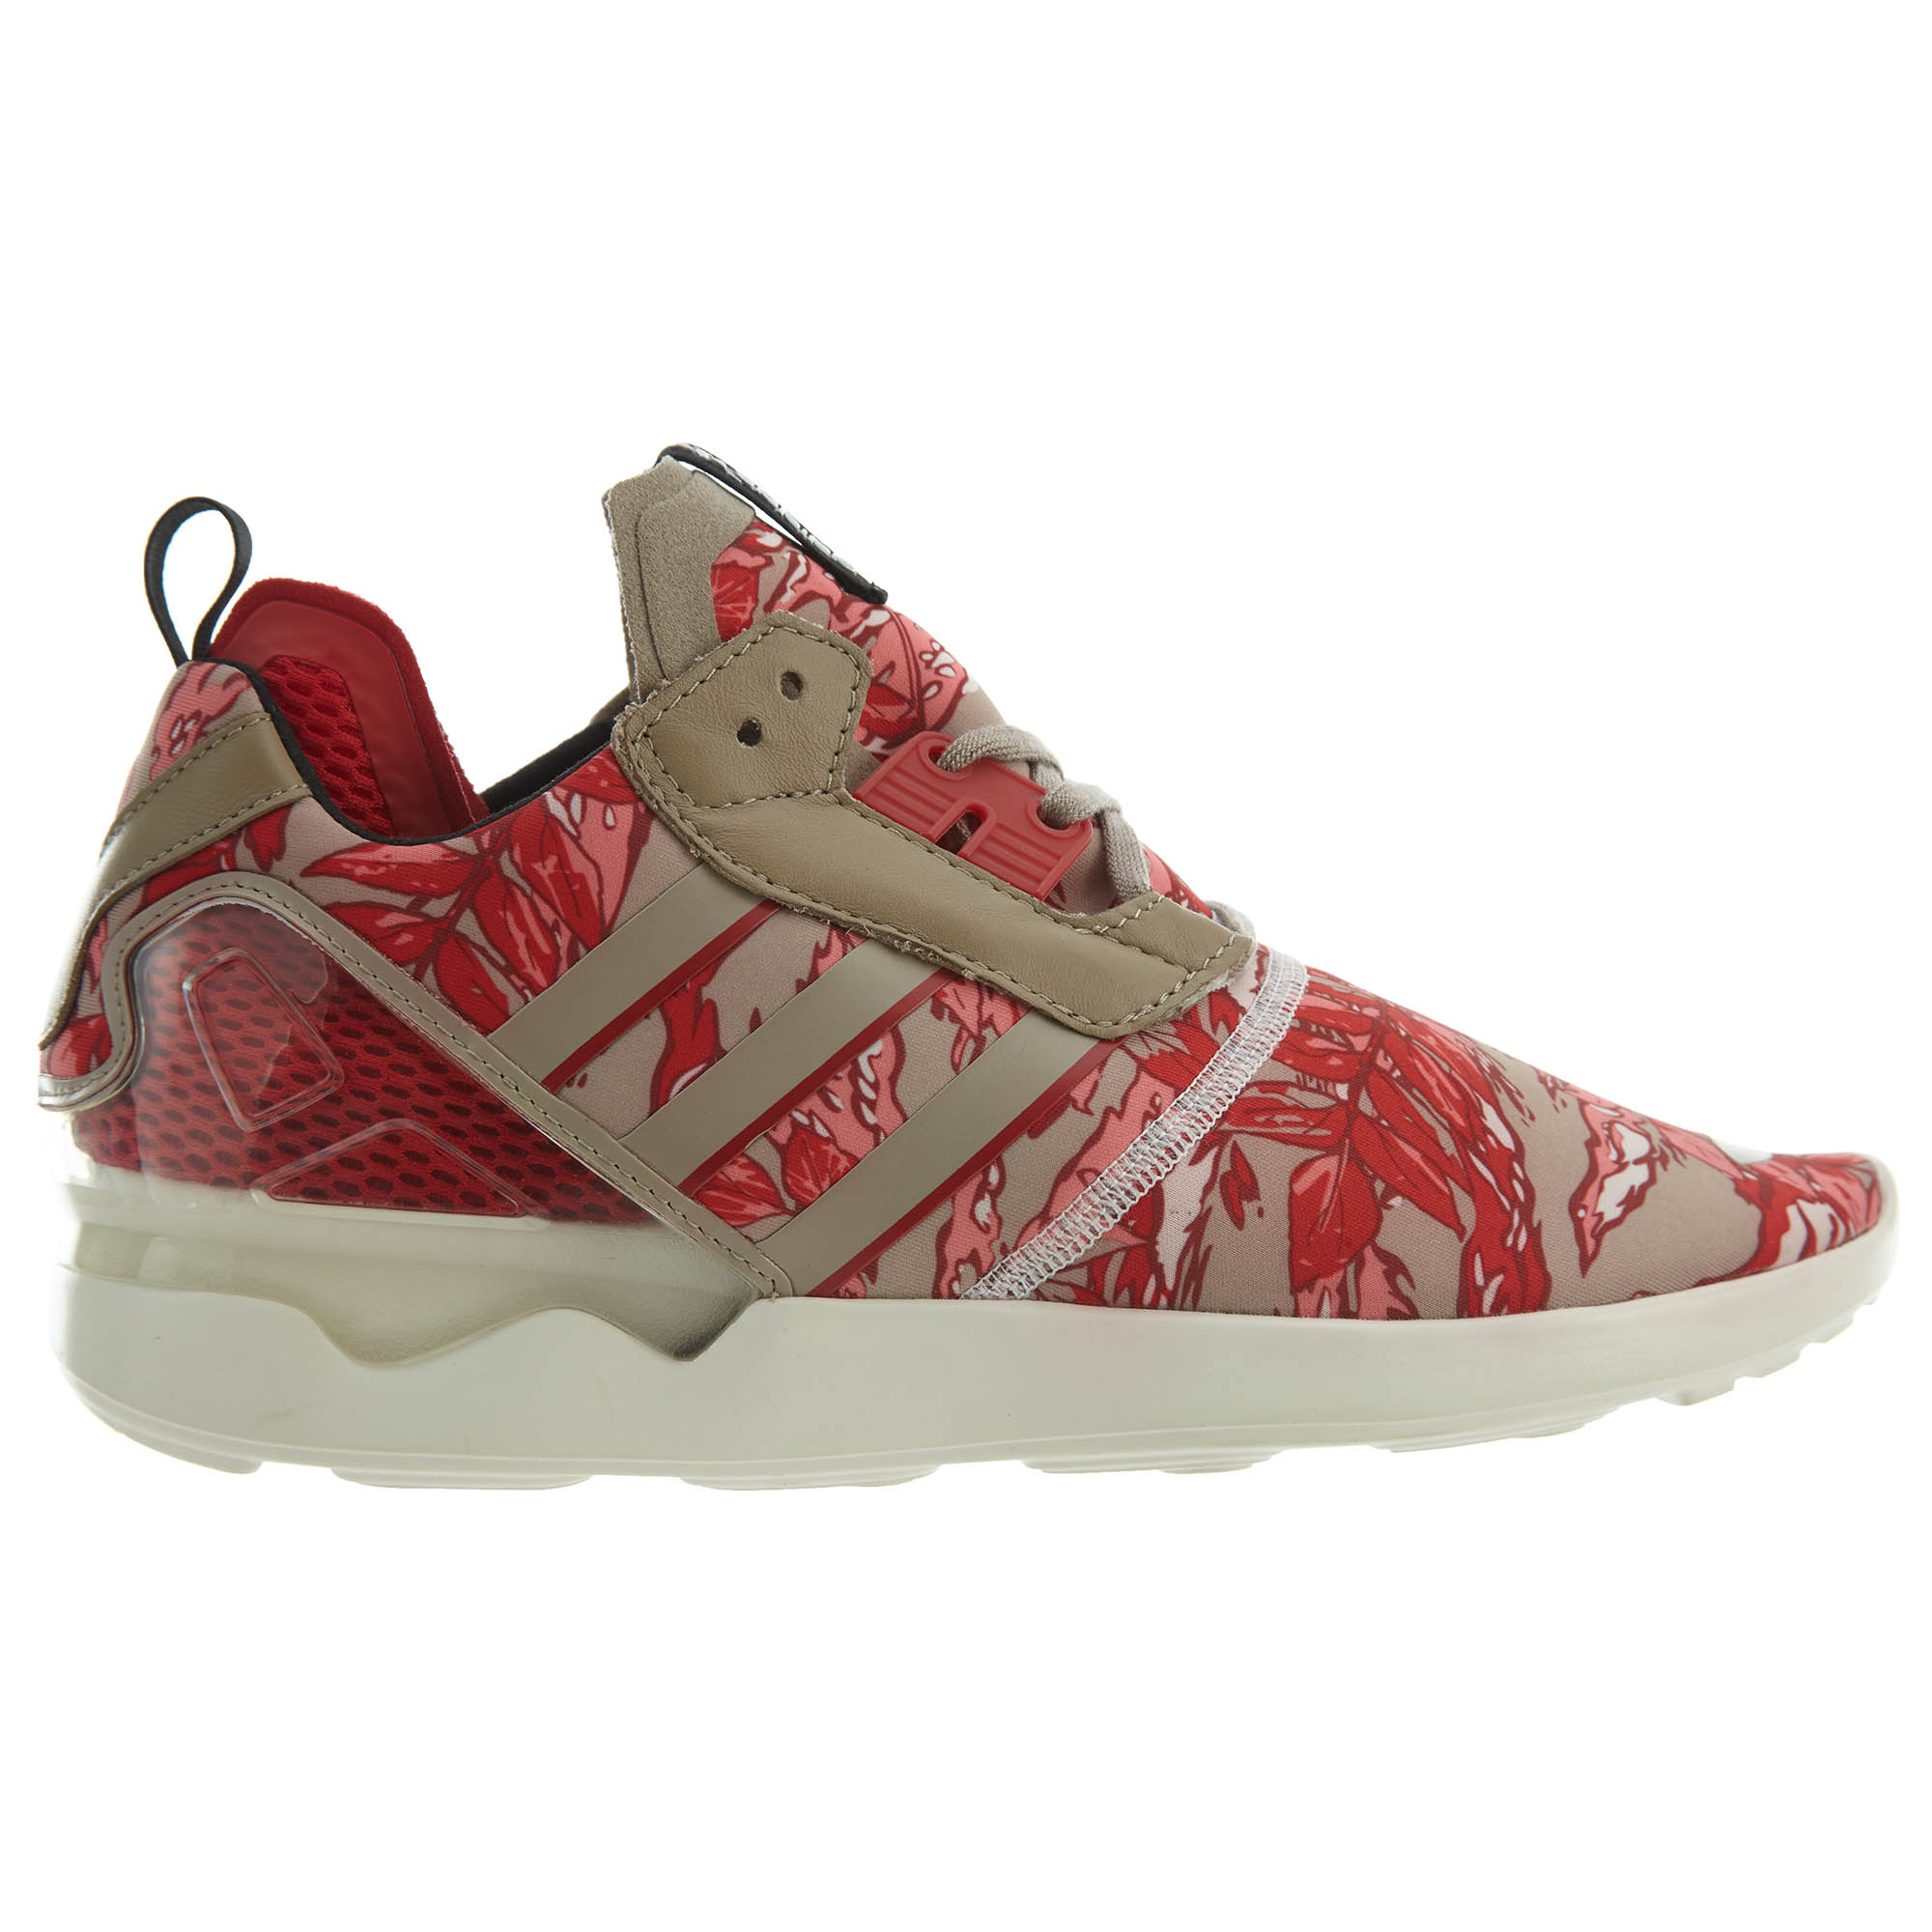 adidas Zx 8000 Boost Pink/Red-Grey Men's - B26365 - US